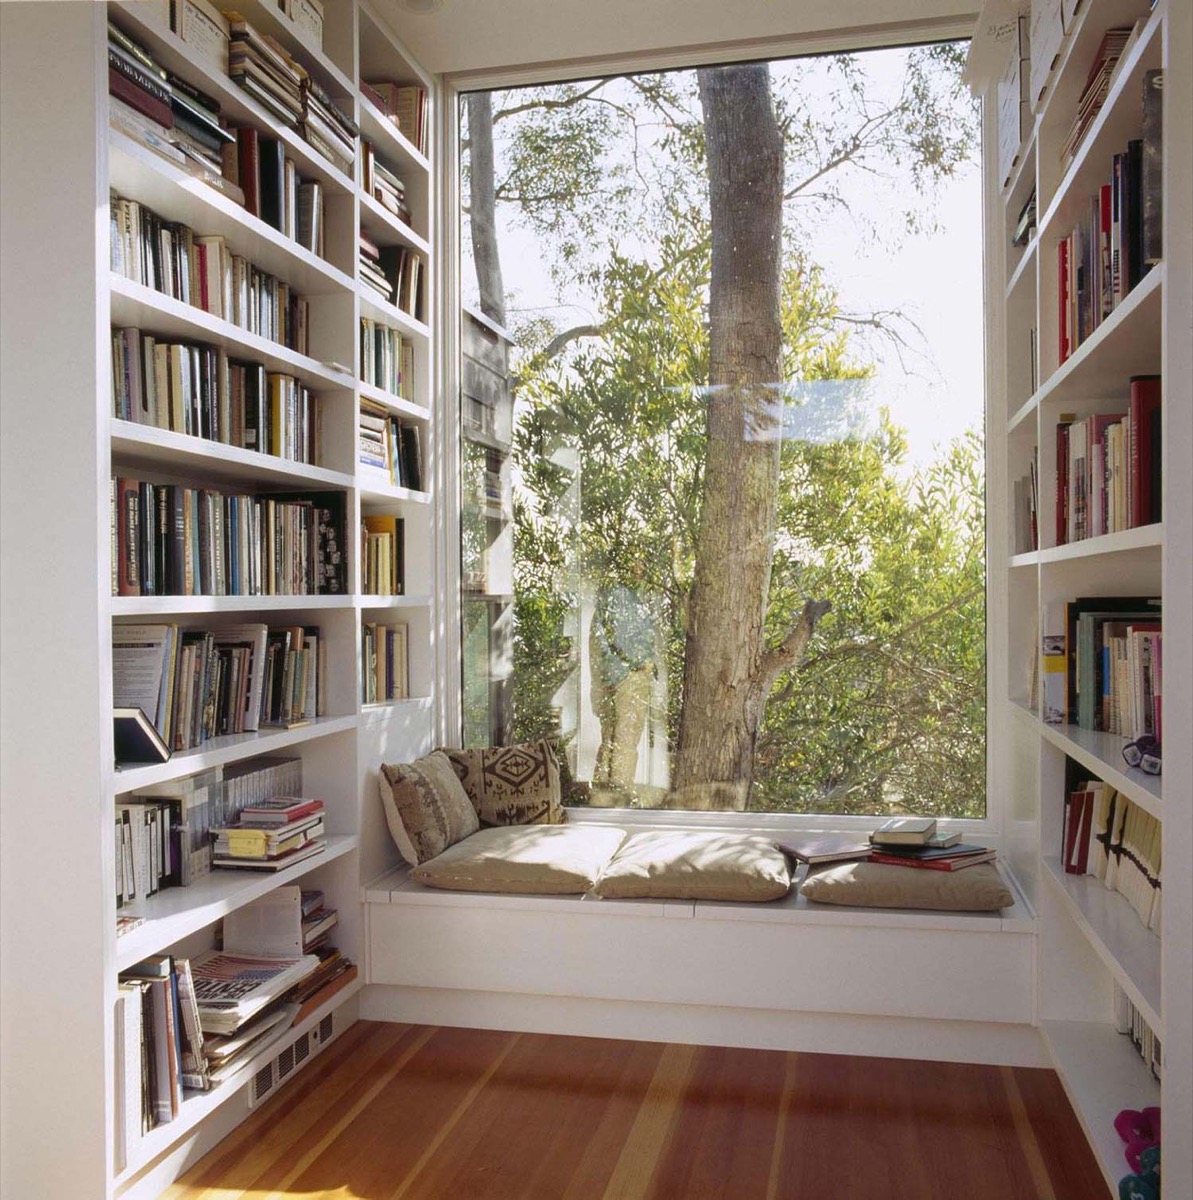 The Garden House Book Nook is the new favourite